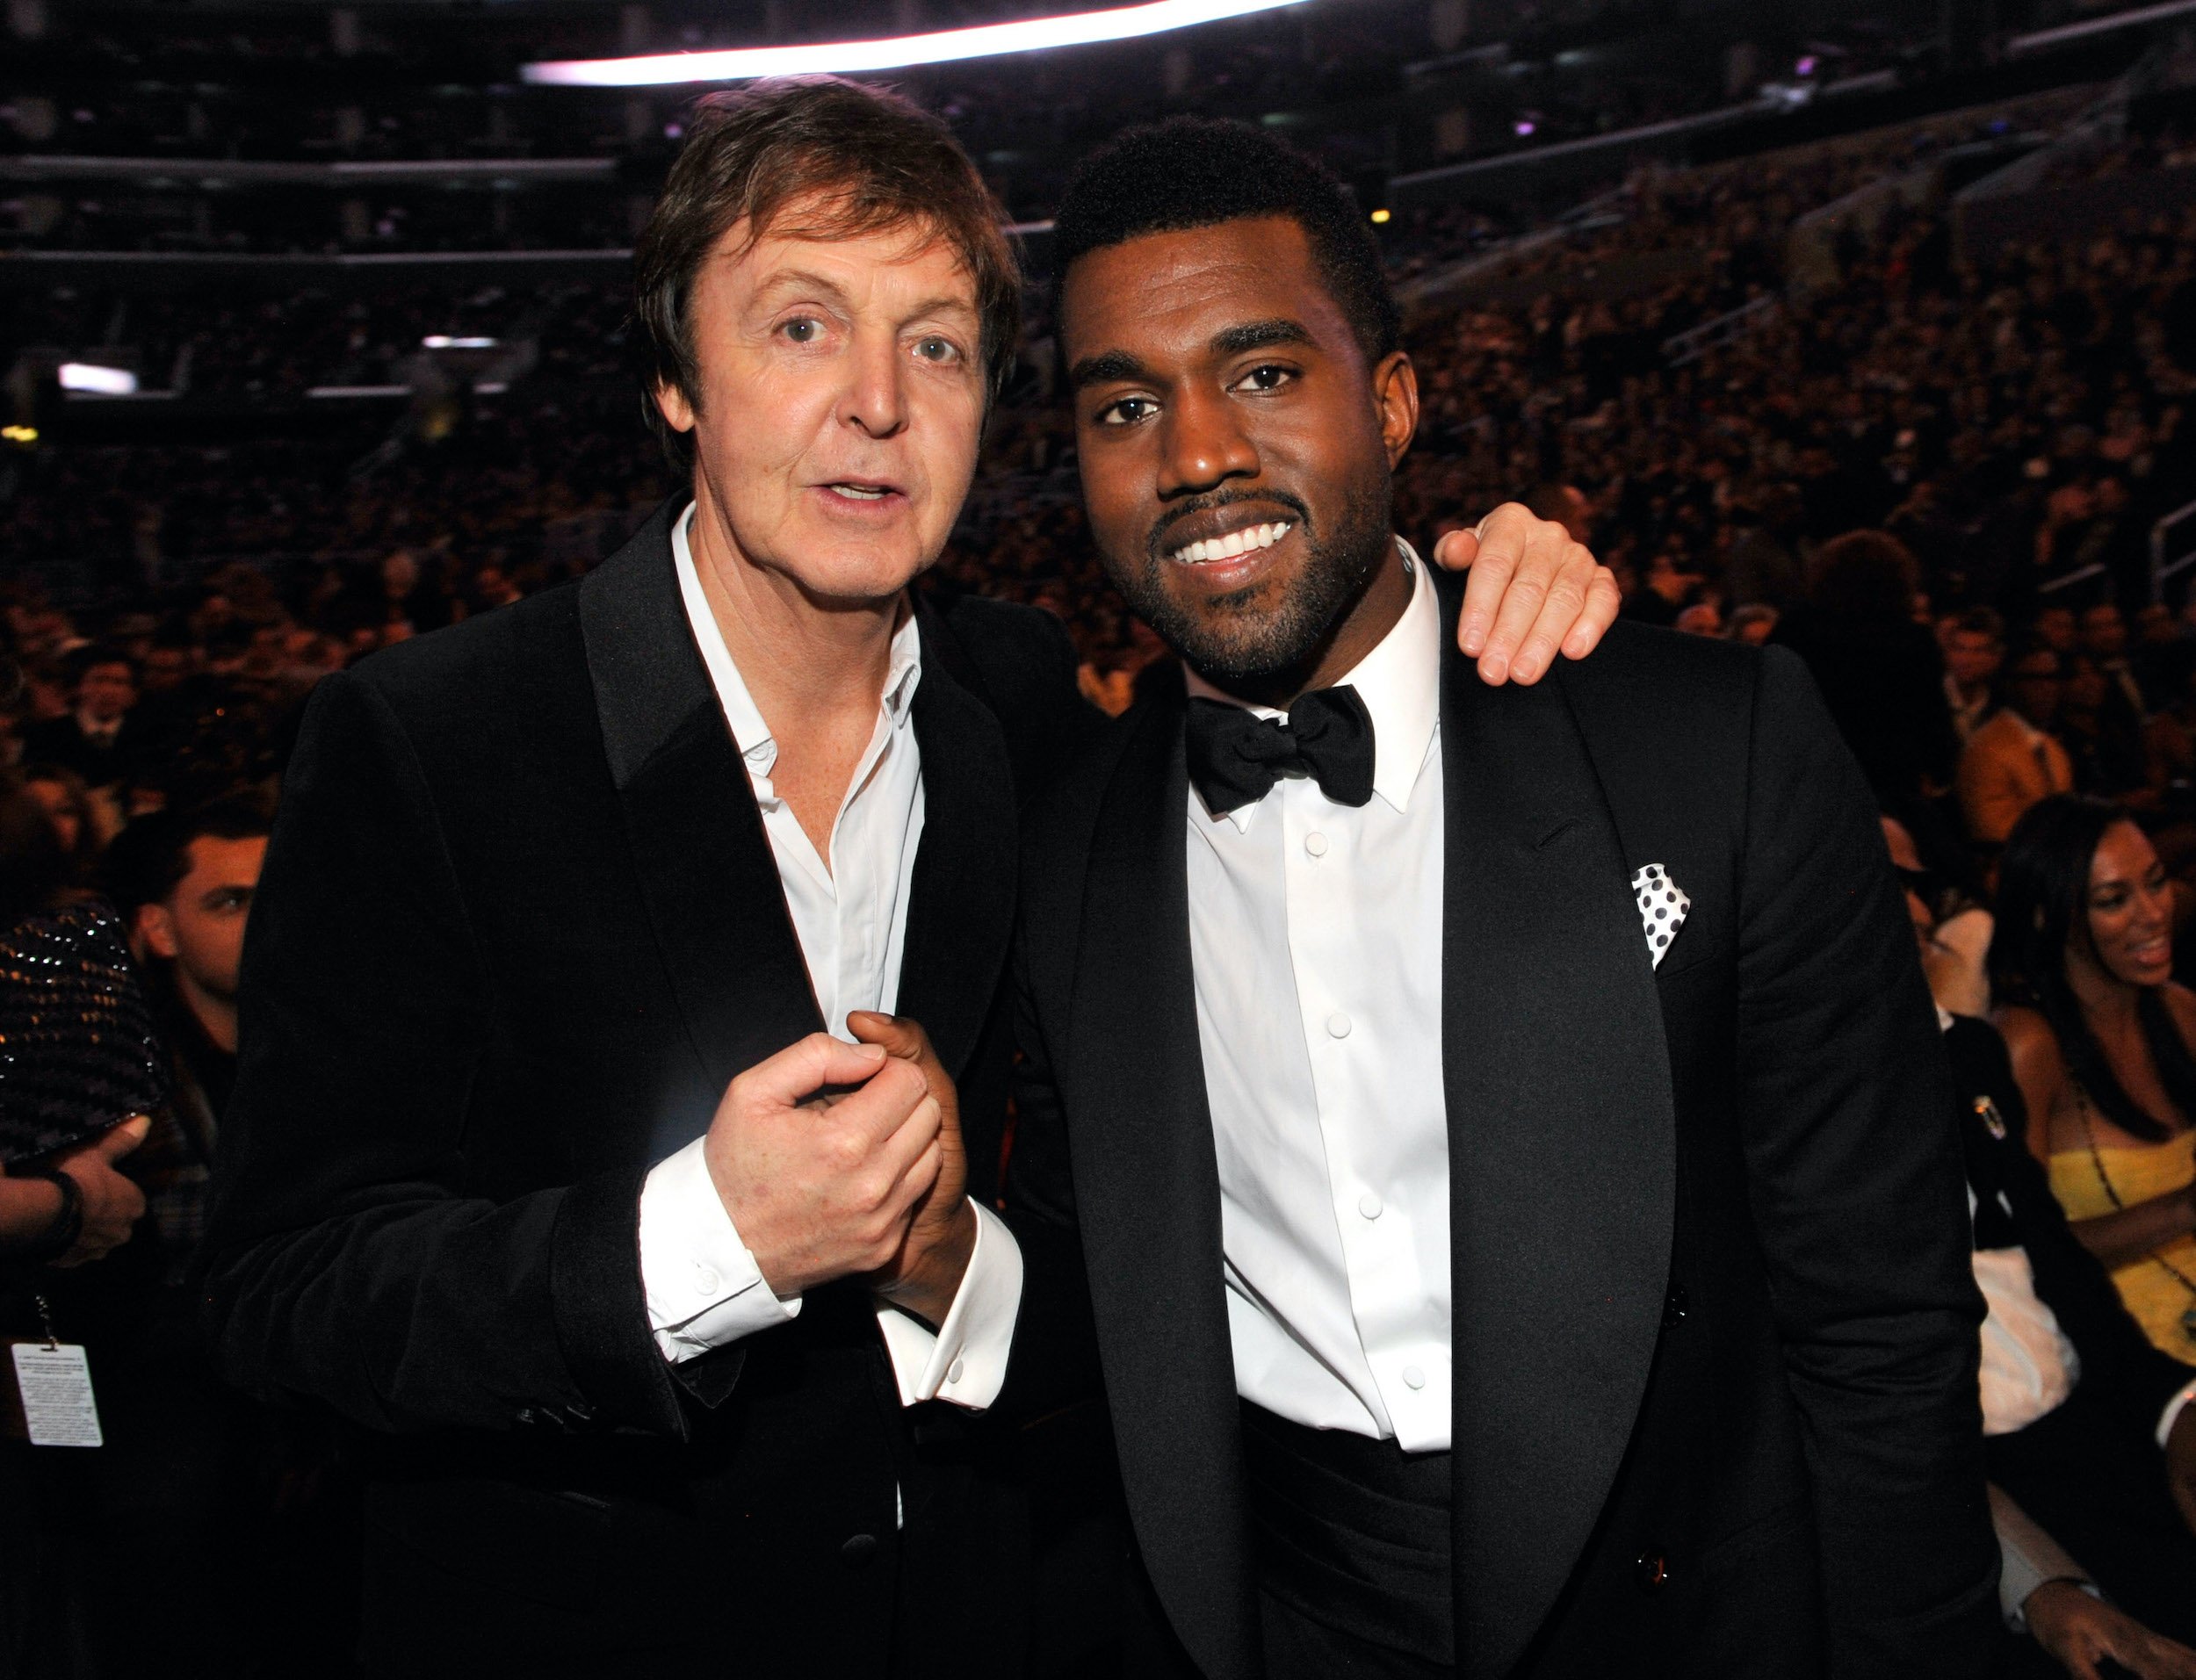 Paul McCartney and Kanye West at the 51st Grammy Awards